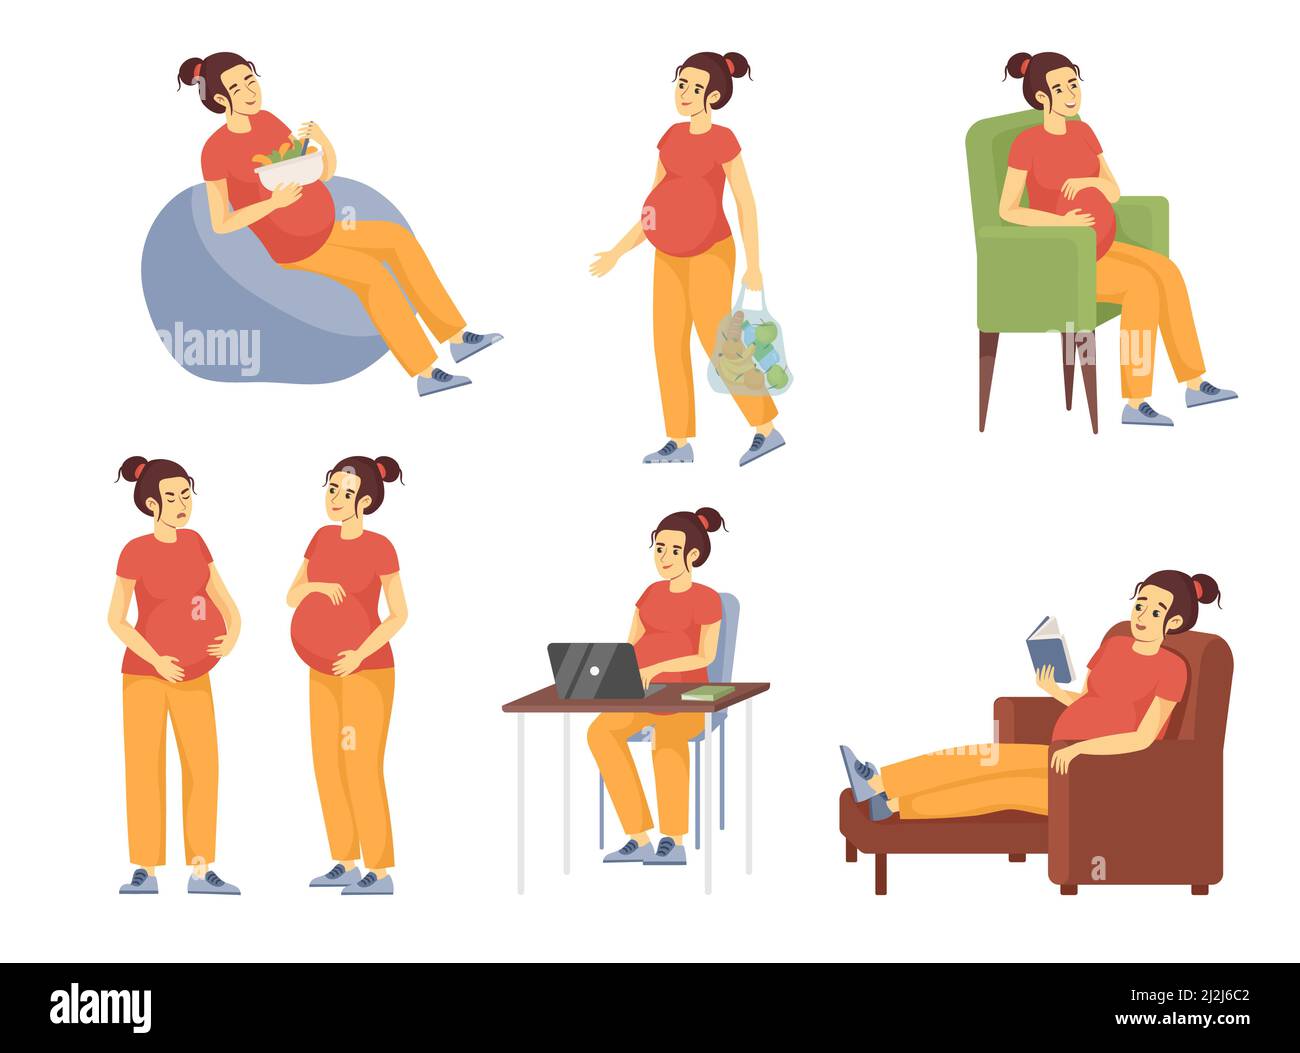 Pregnant woman lifestyle cartoon vector illustration set. Happy future mom doing different exercises like eating, reading, working, shopping. Female p Stock Vector